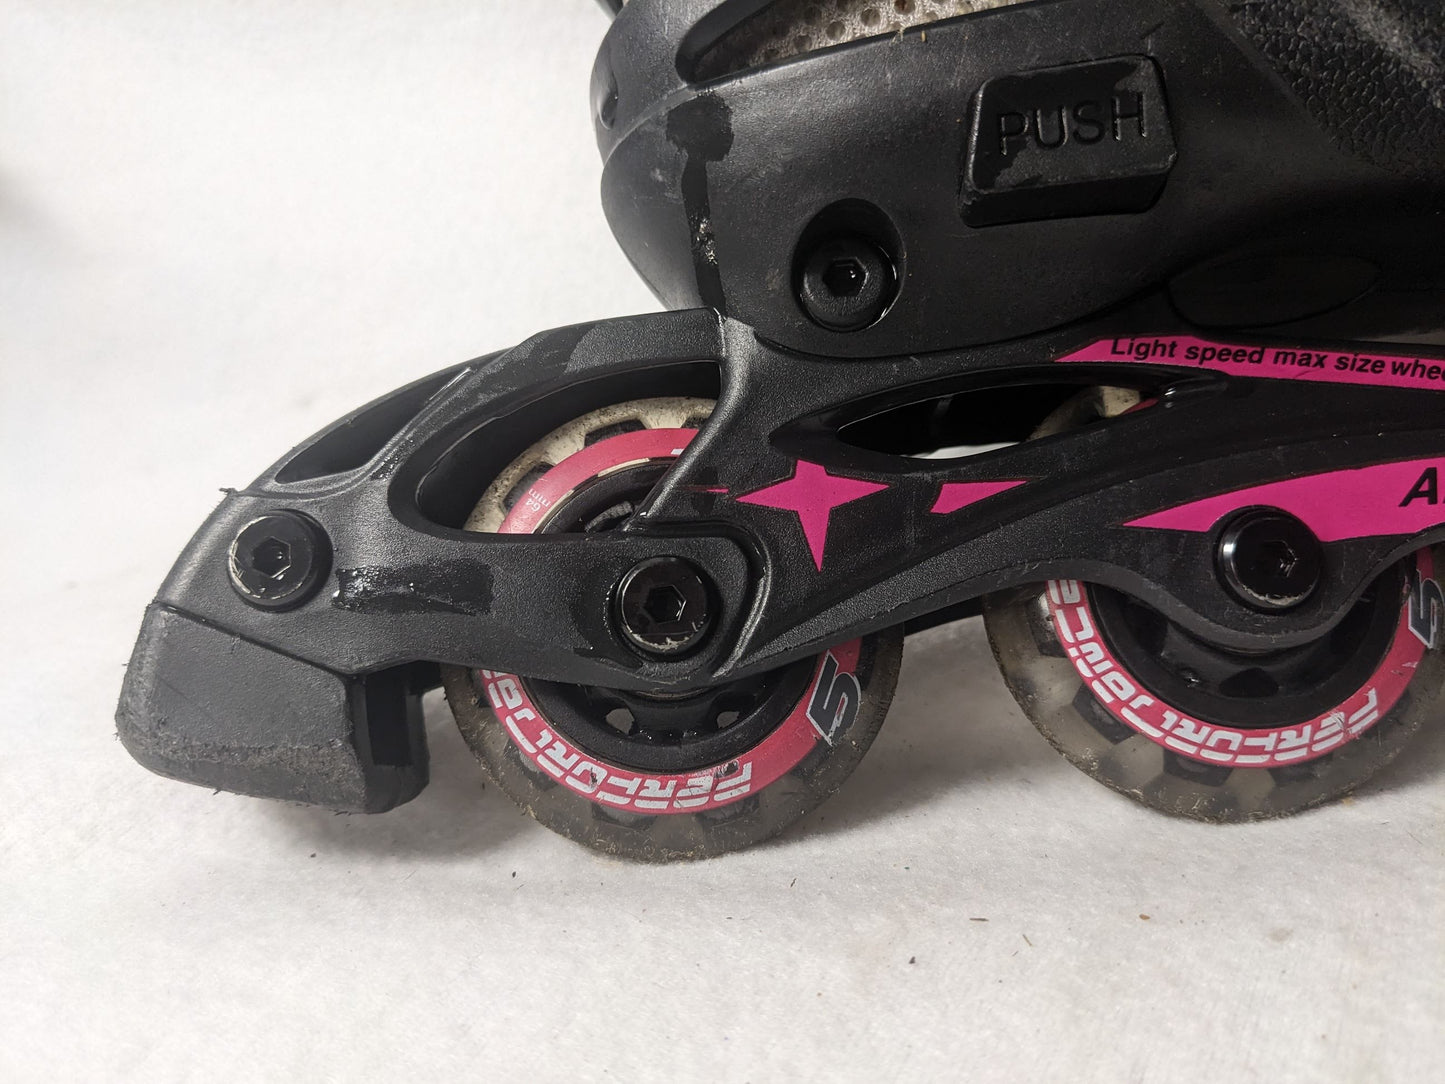 Schwinn Youth In-Line-Skates Size 1-4 Adjustable Color Black Condition Used